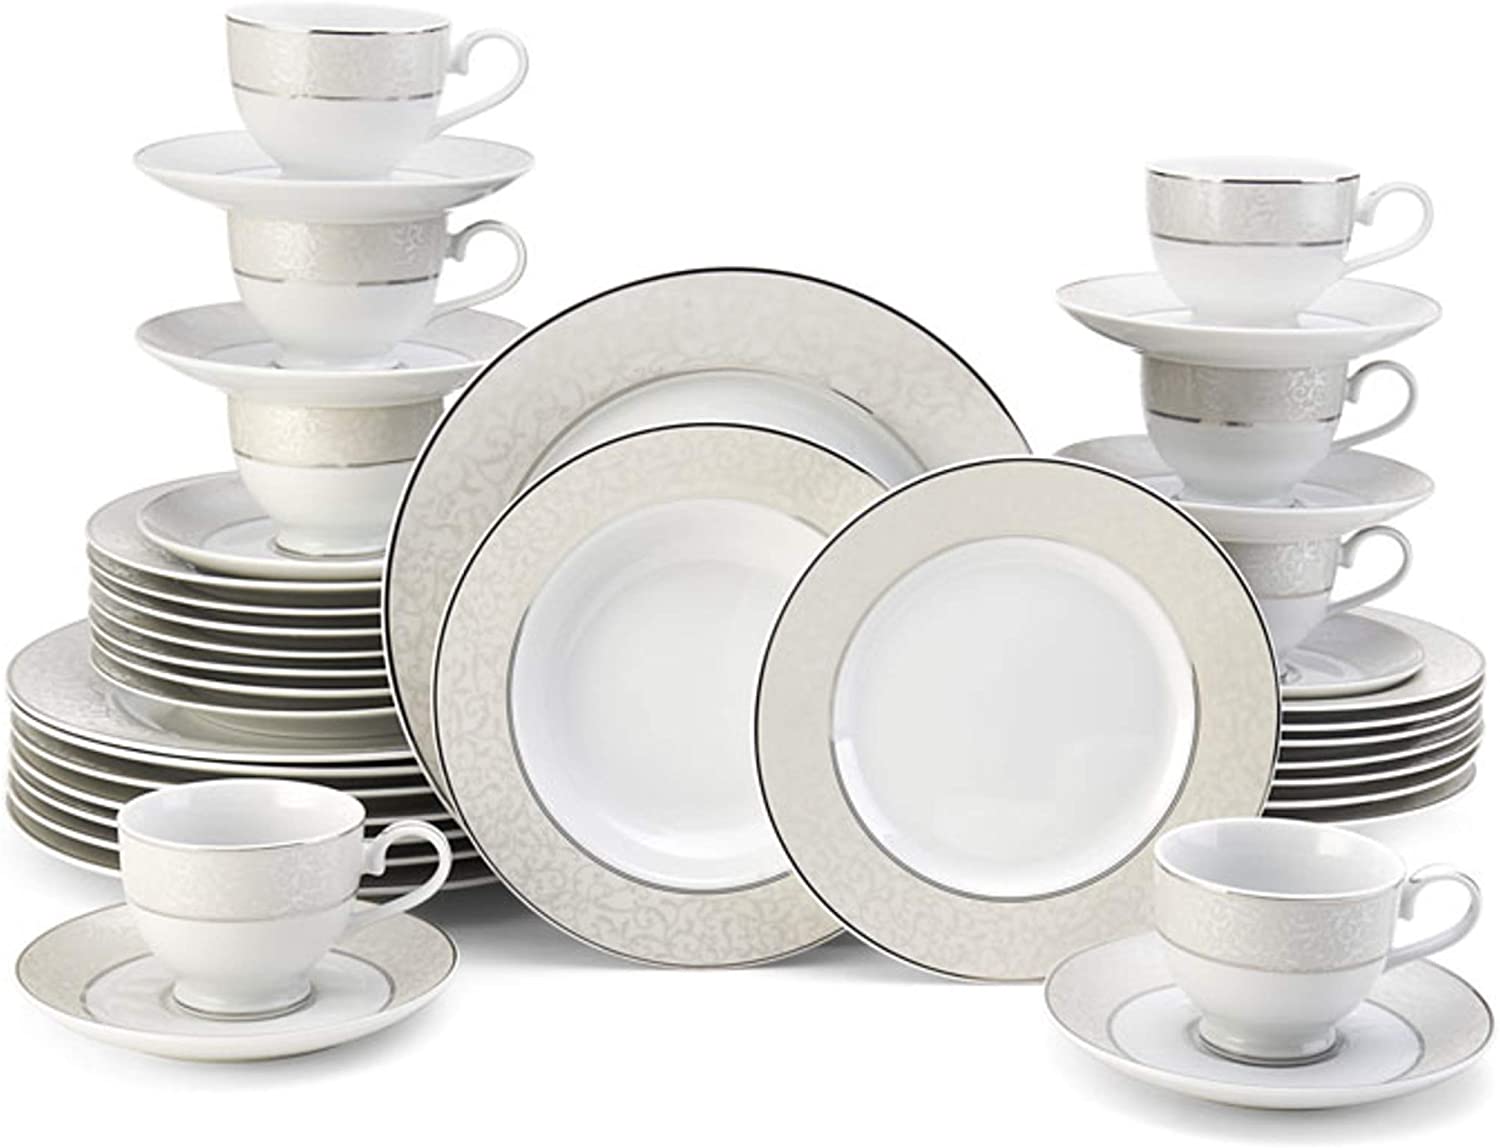 Mikasa Parchment 40-Piece Dinnerware Set Only $83.99 Shipped After $116 Price Drop! - Hot Deals ...